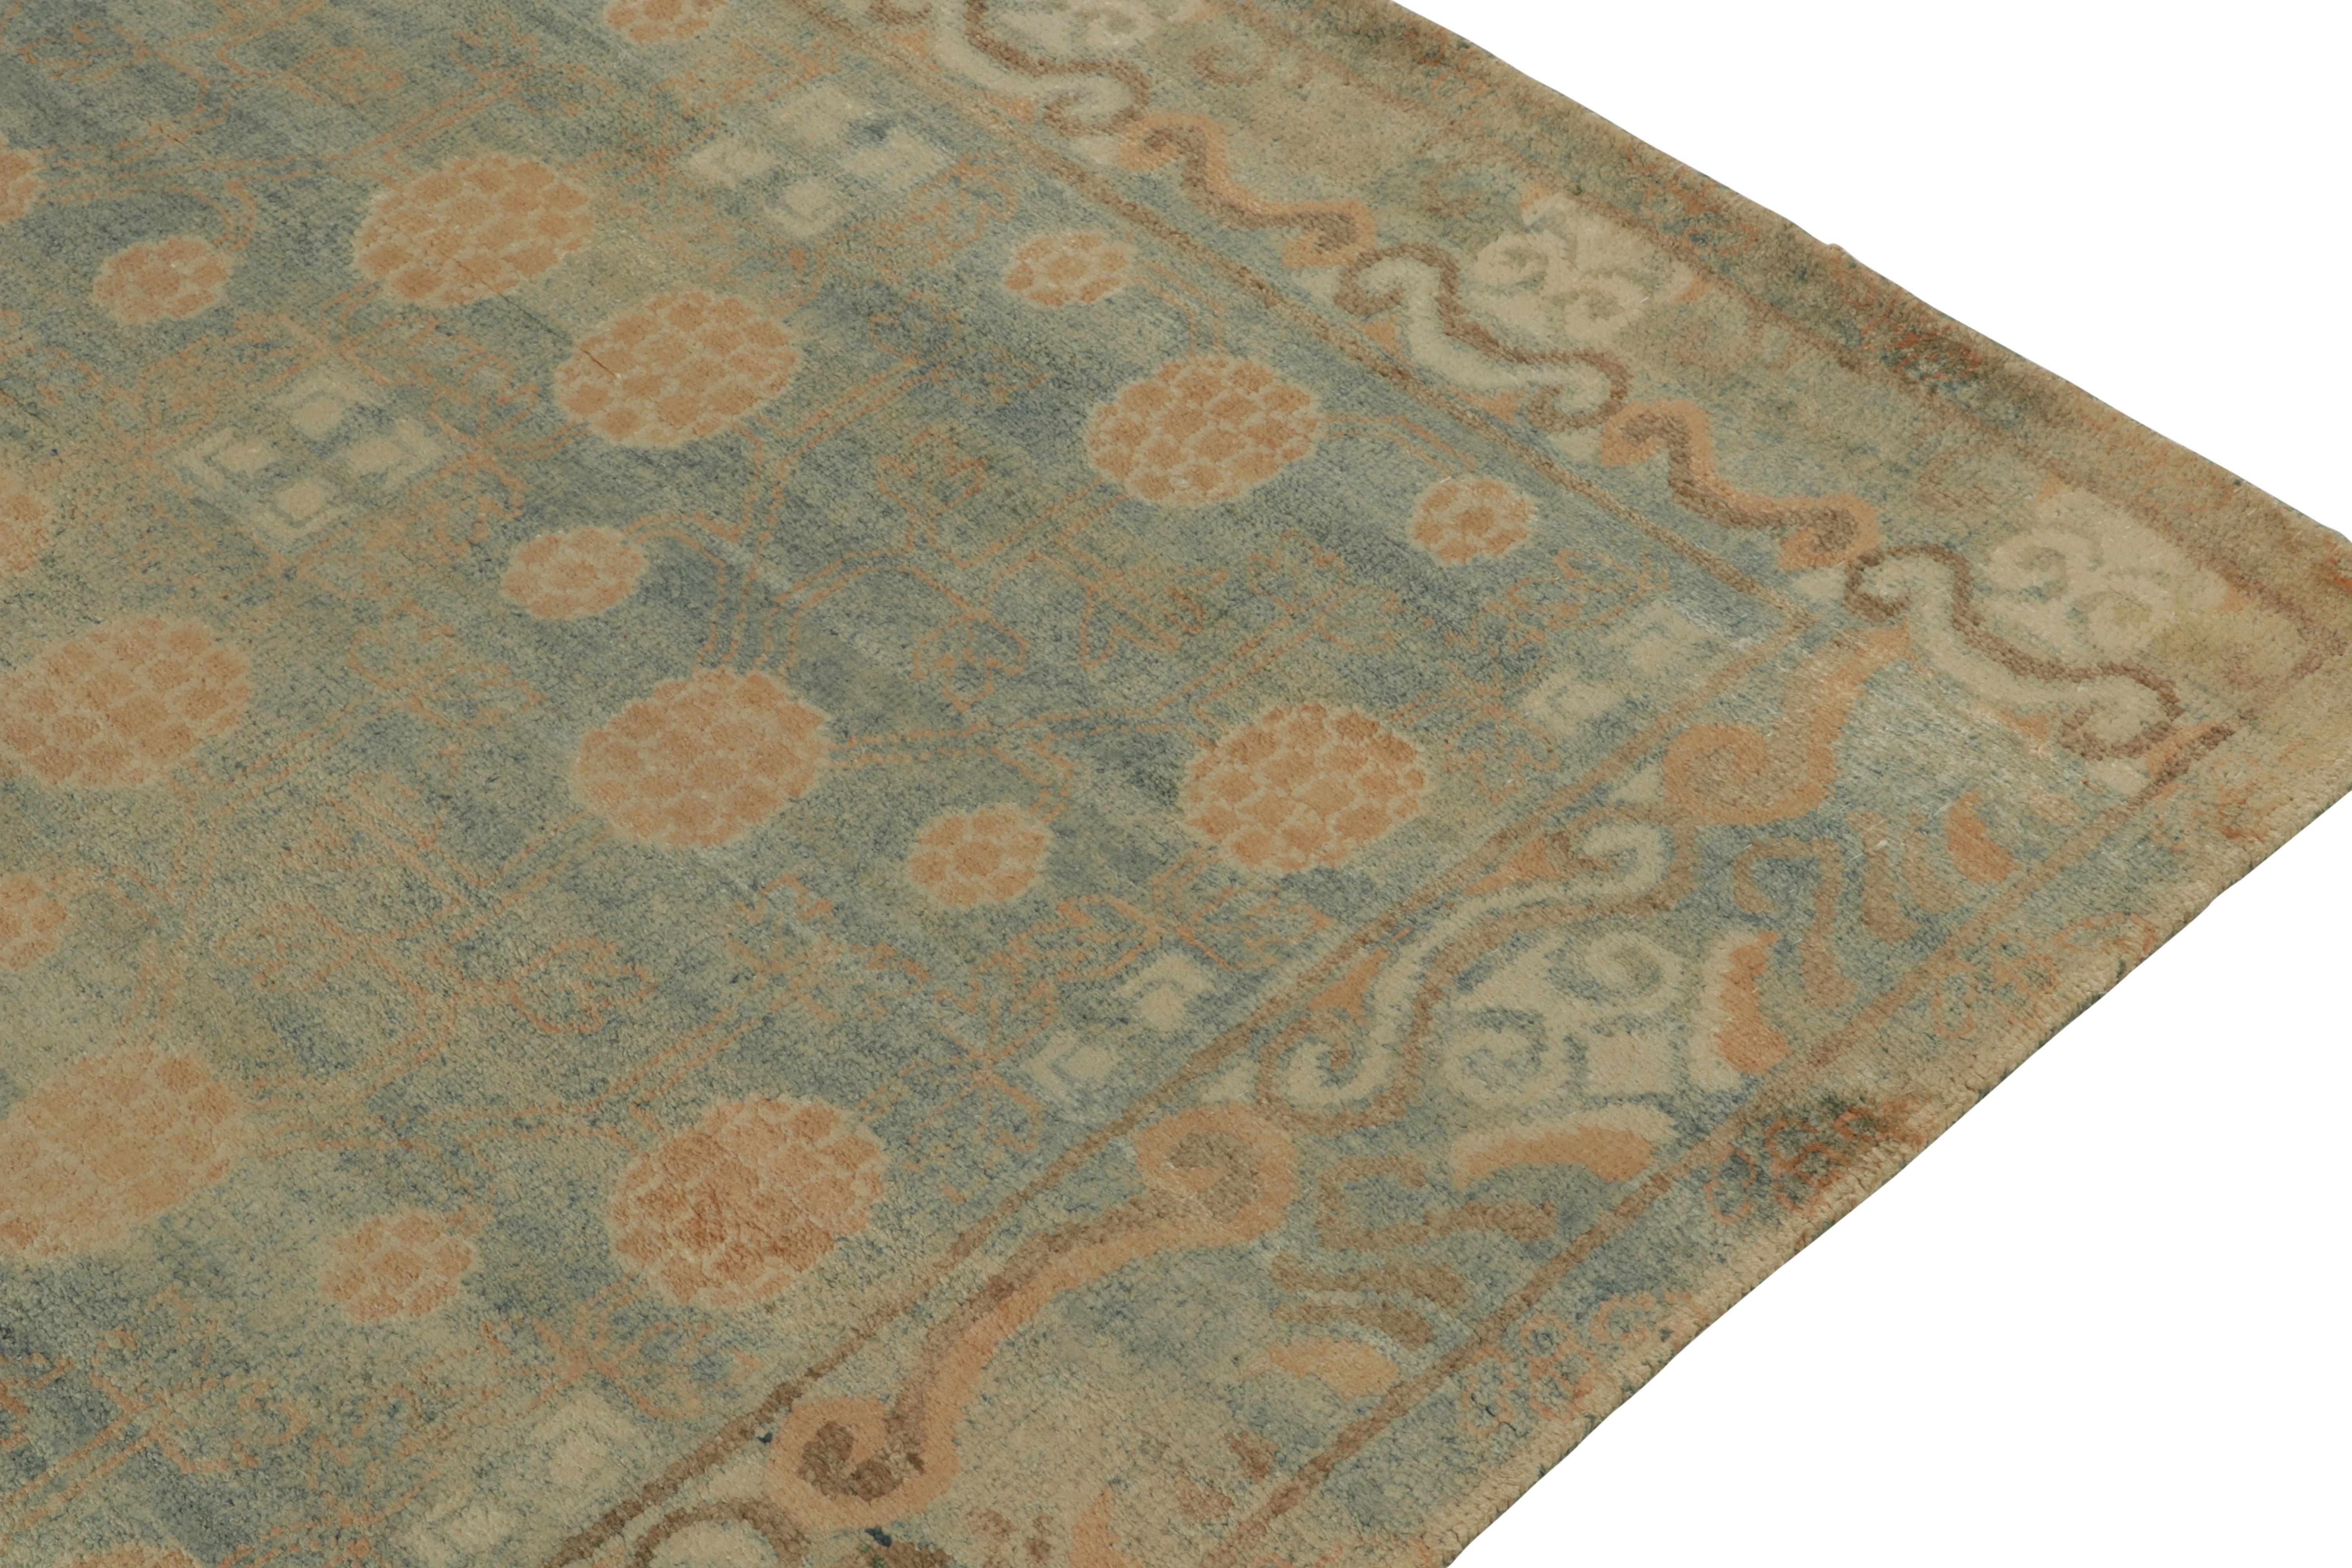 Rug & Kilim’s Khotan Style Rug in Blue, Beige-Brown Pomegranate Pattern In New Condition For Sale In Long Island City, NY